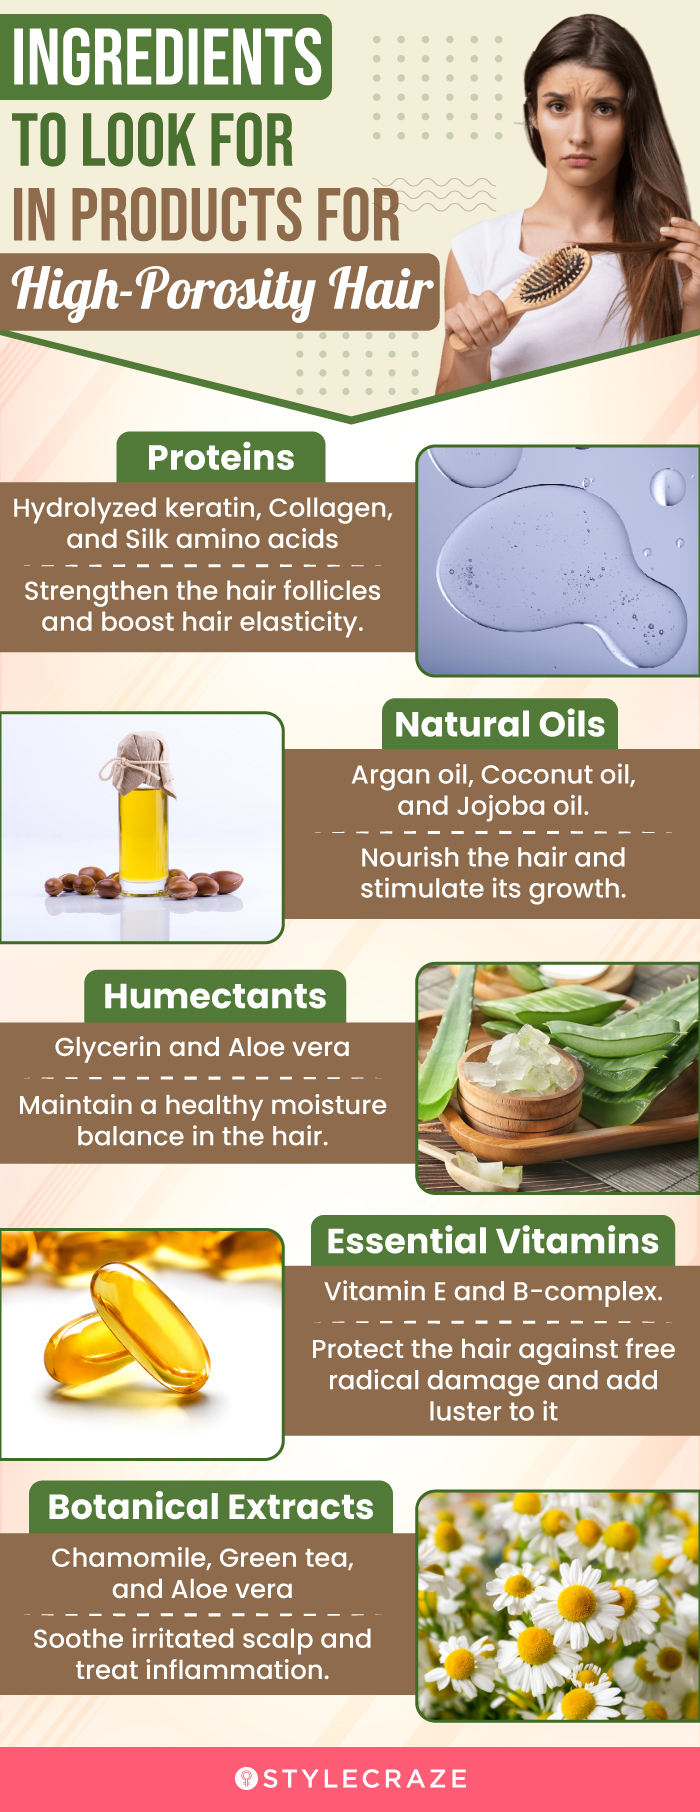  Ingredients To Look For In Products For High-Porosity Hair (infographic)